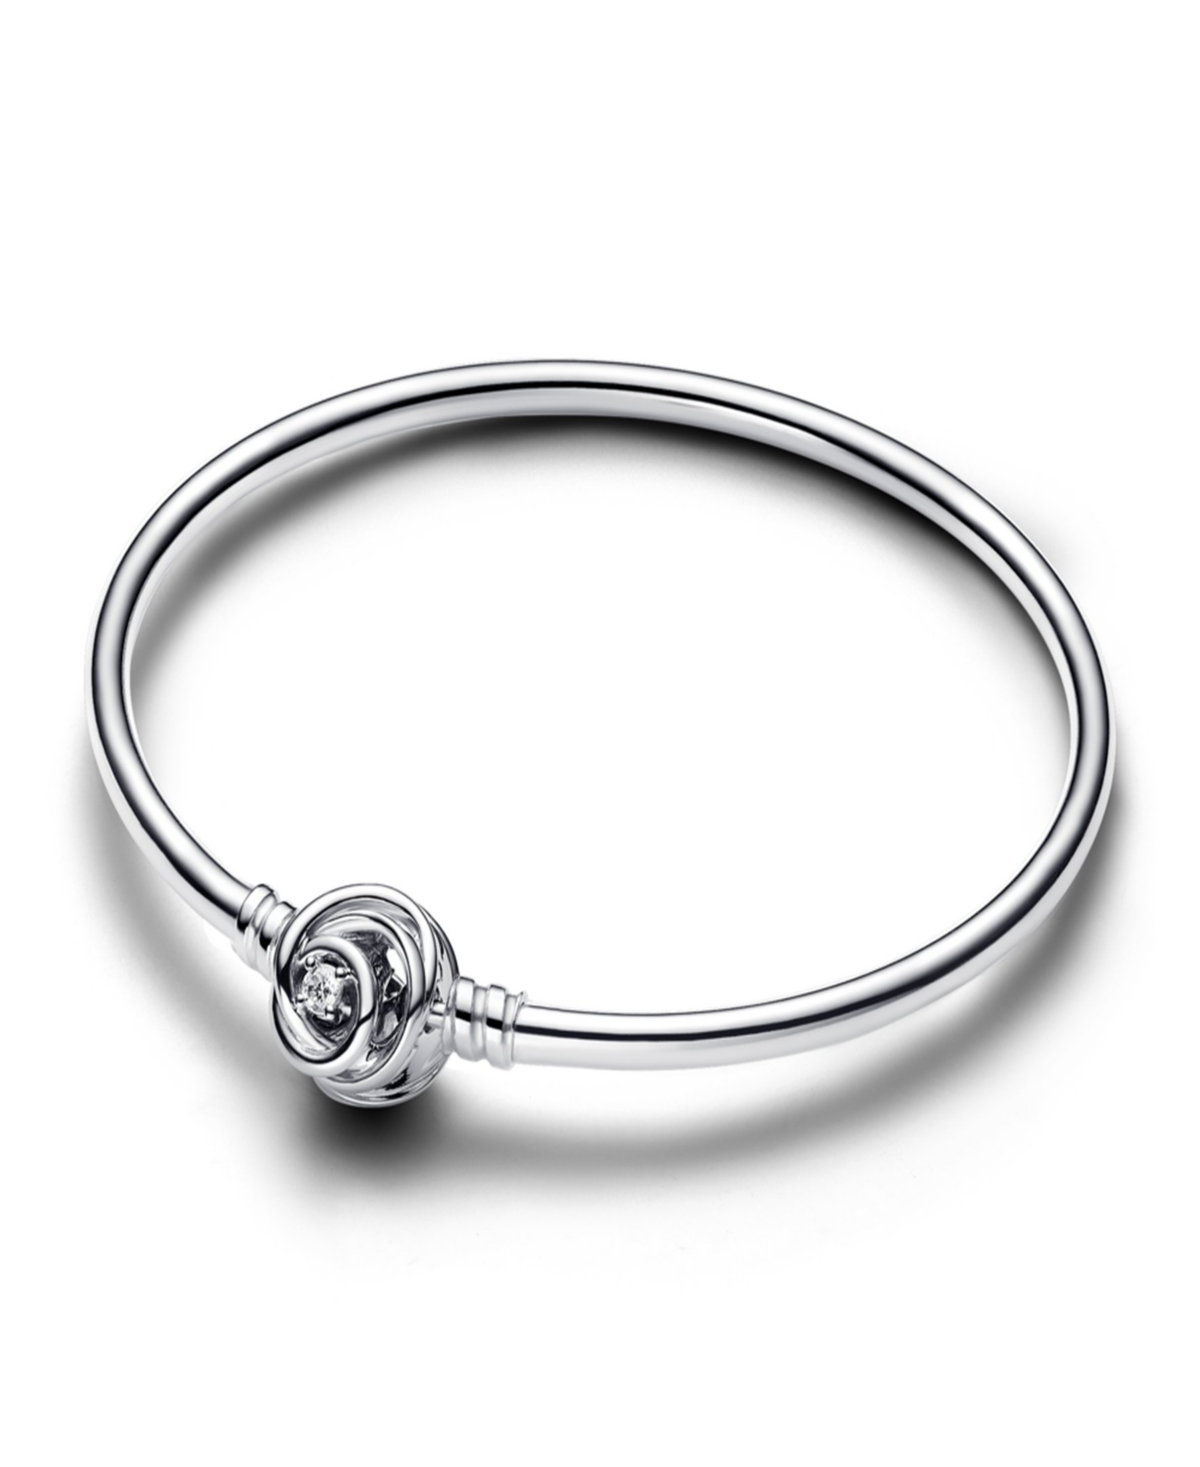 Moments Sterling Silver Encircled Clasp Bangle - Silver